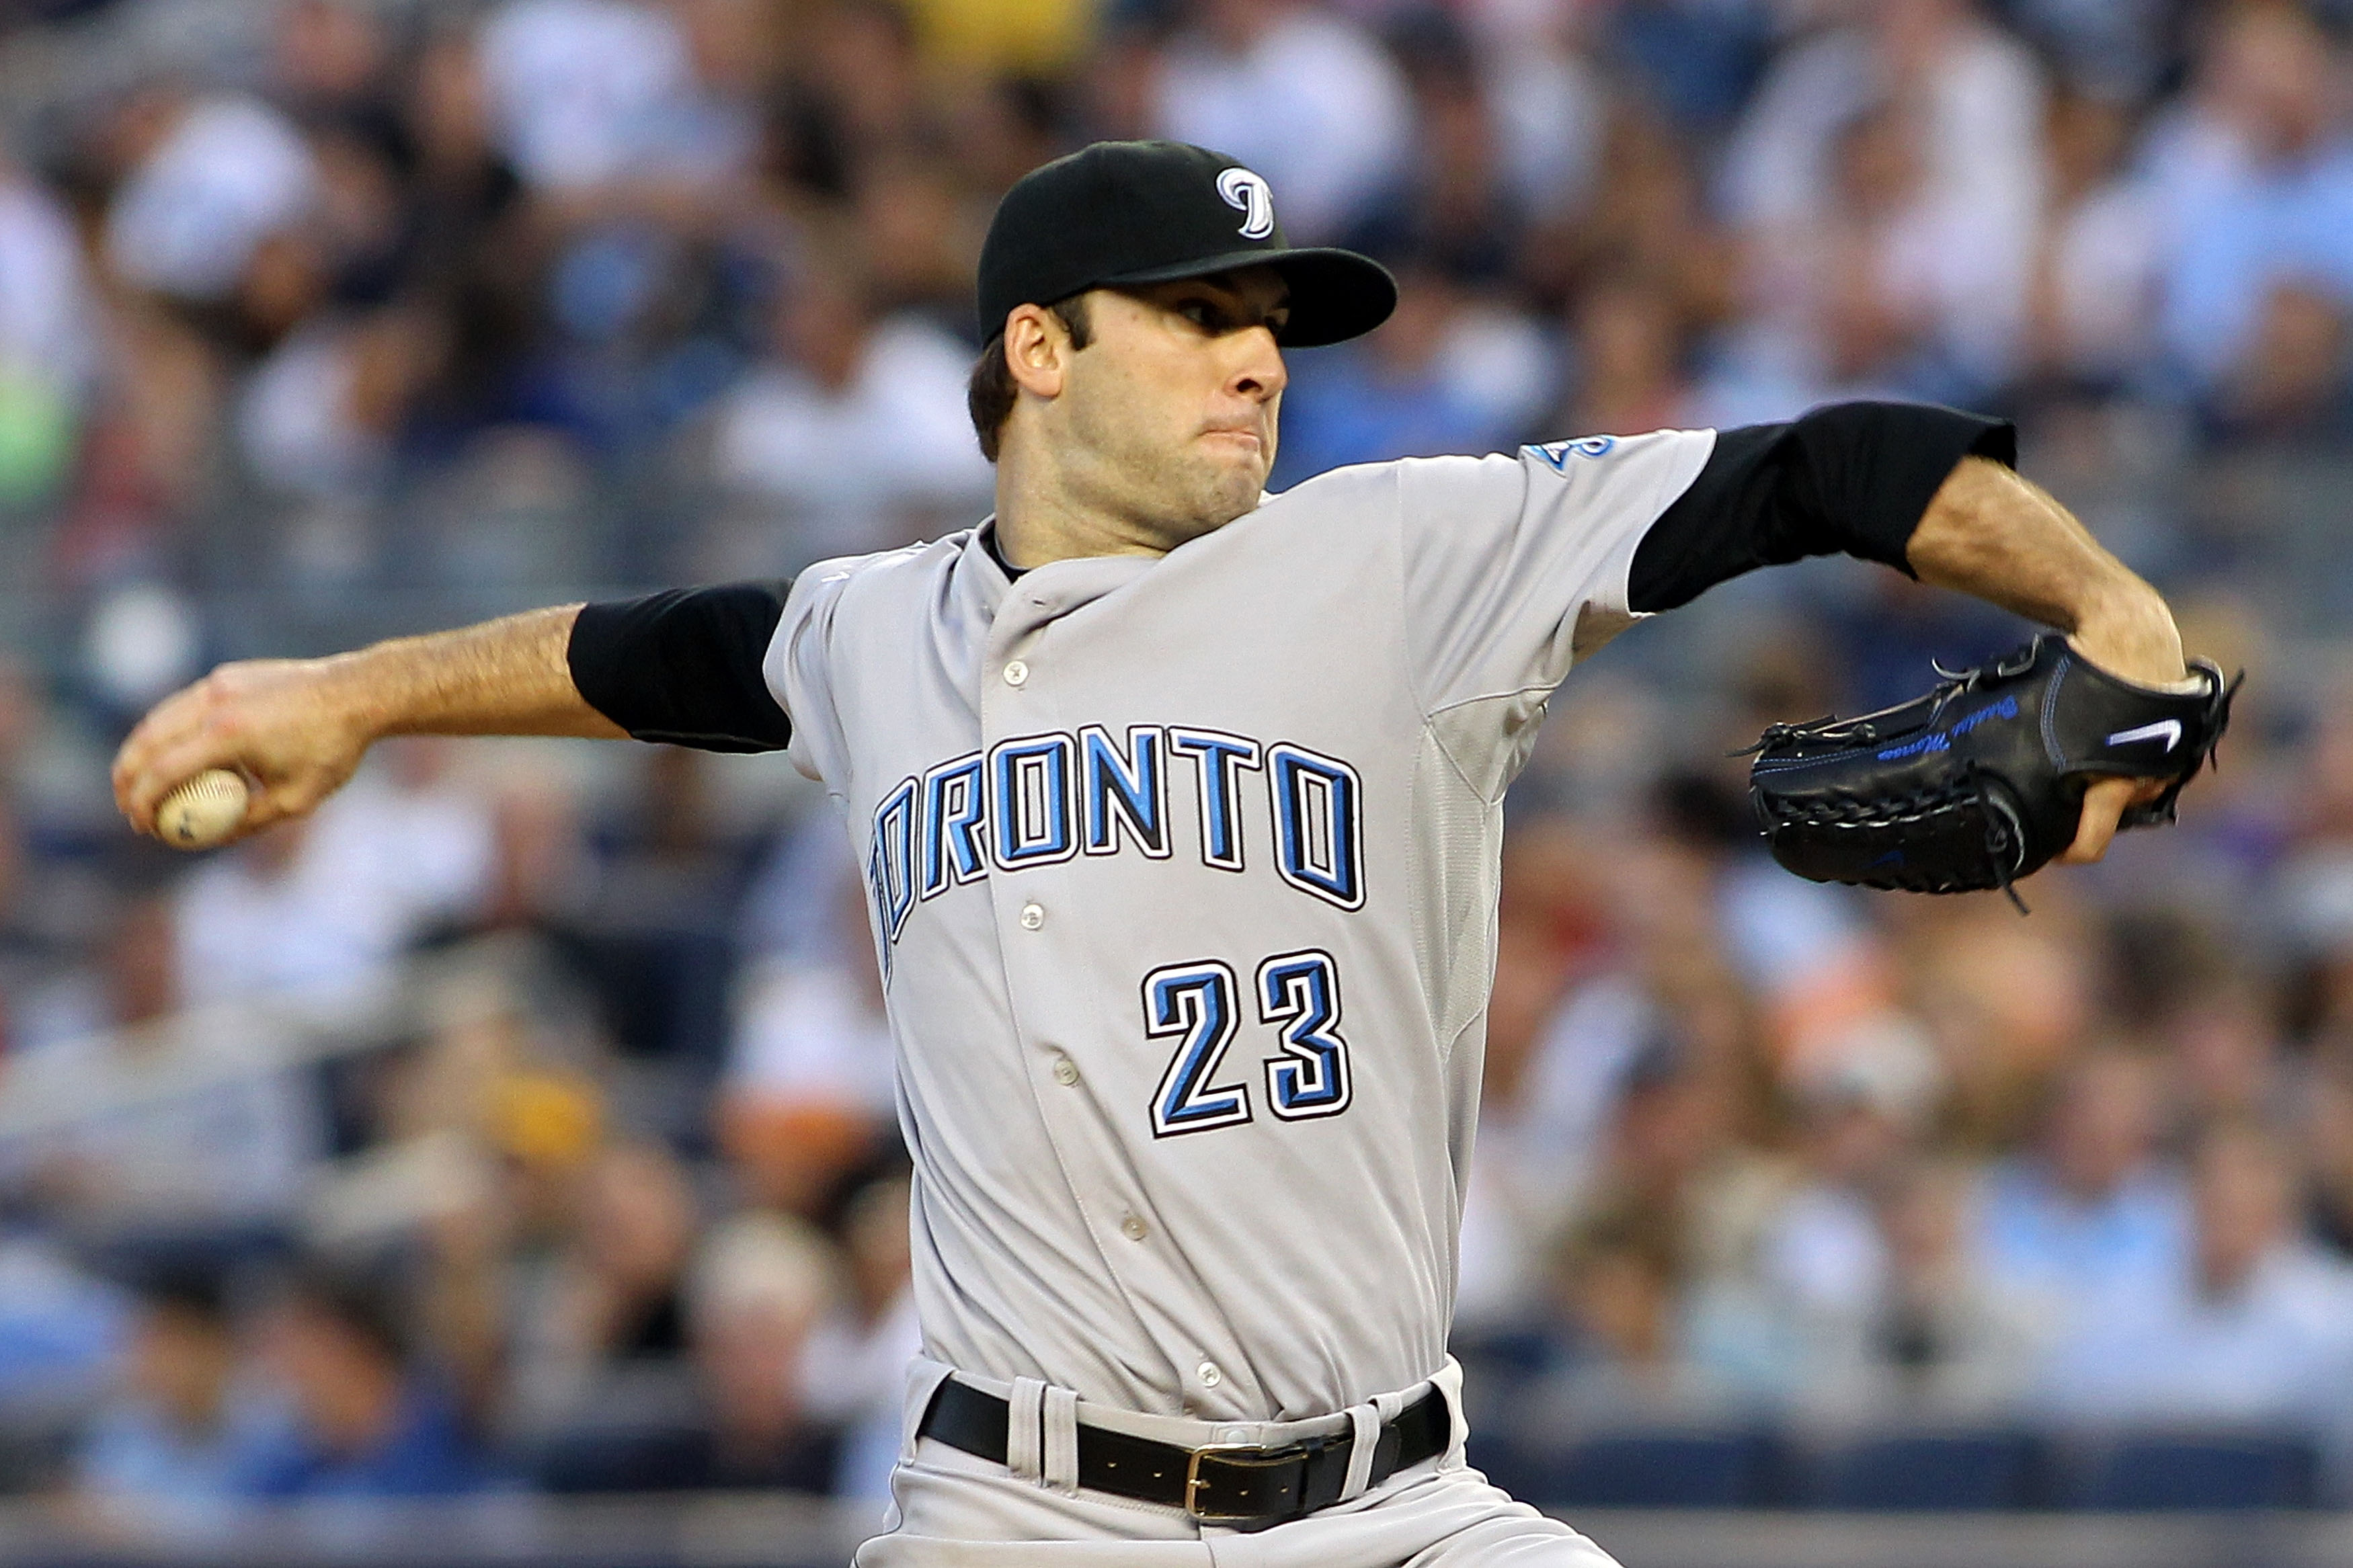 NEW YORK - AUGUST 02:  Brandon Morrow #23 of the Toronto Blue Jays pitches against the New York Yankees  on August 2, 2010 at Yankee Stadium in the Bronx borough of New York City.  (Photo by Michael Heiman/Getty Images)